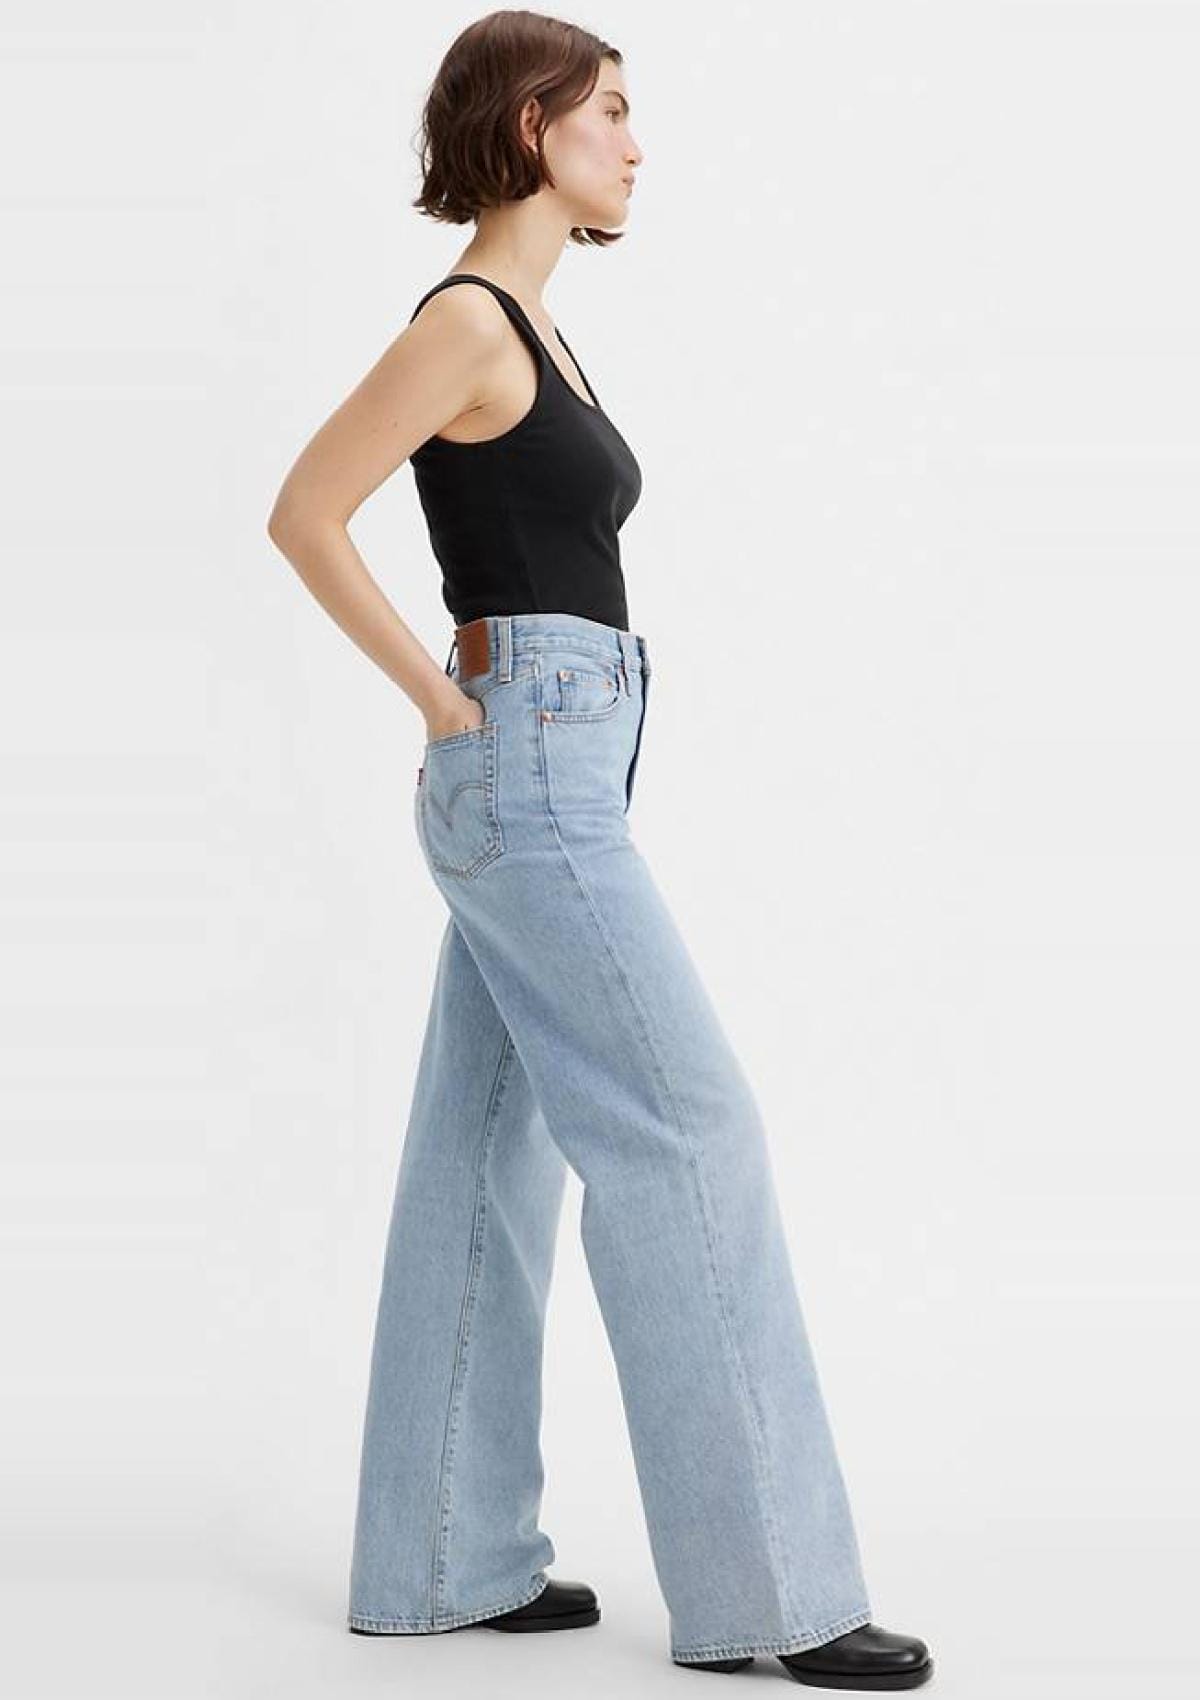 Levi Strauss Jeans A608100020 02 | RIBCAGE WIDE LEG H223 FAR AND